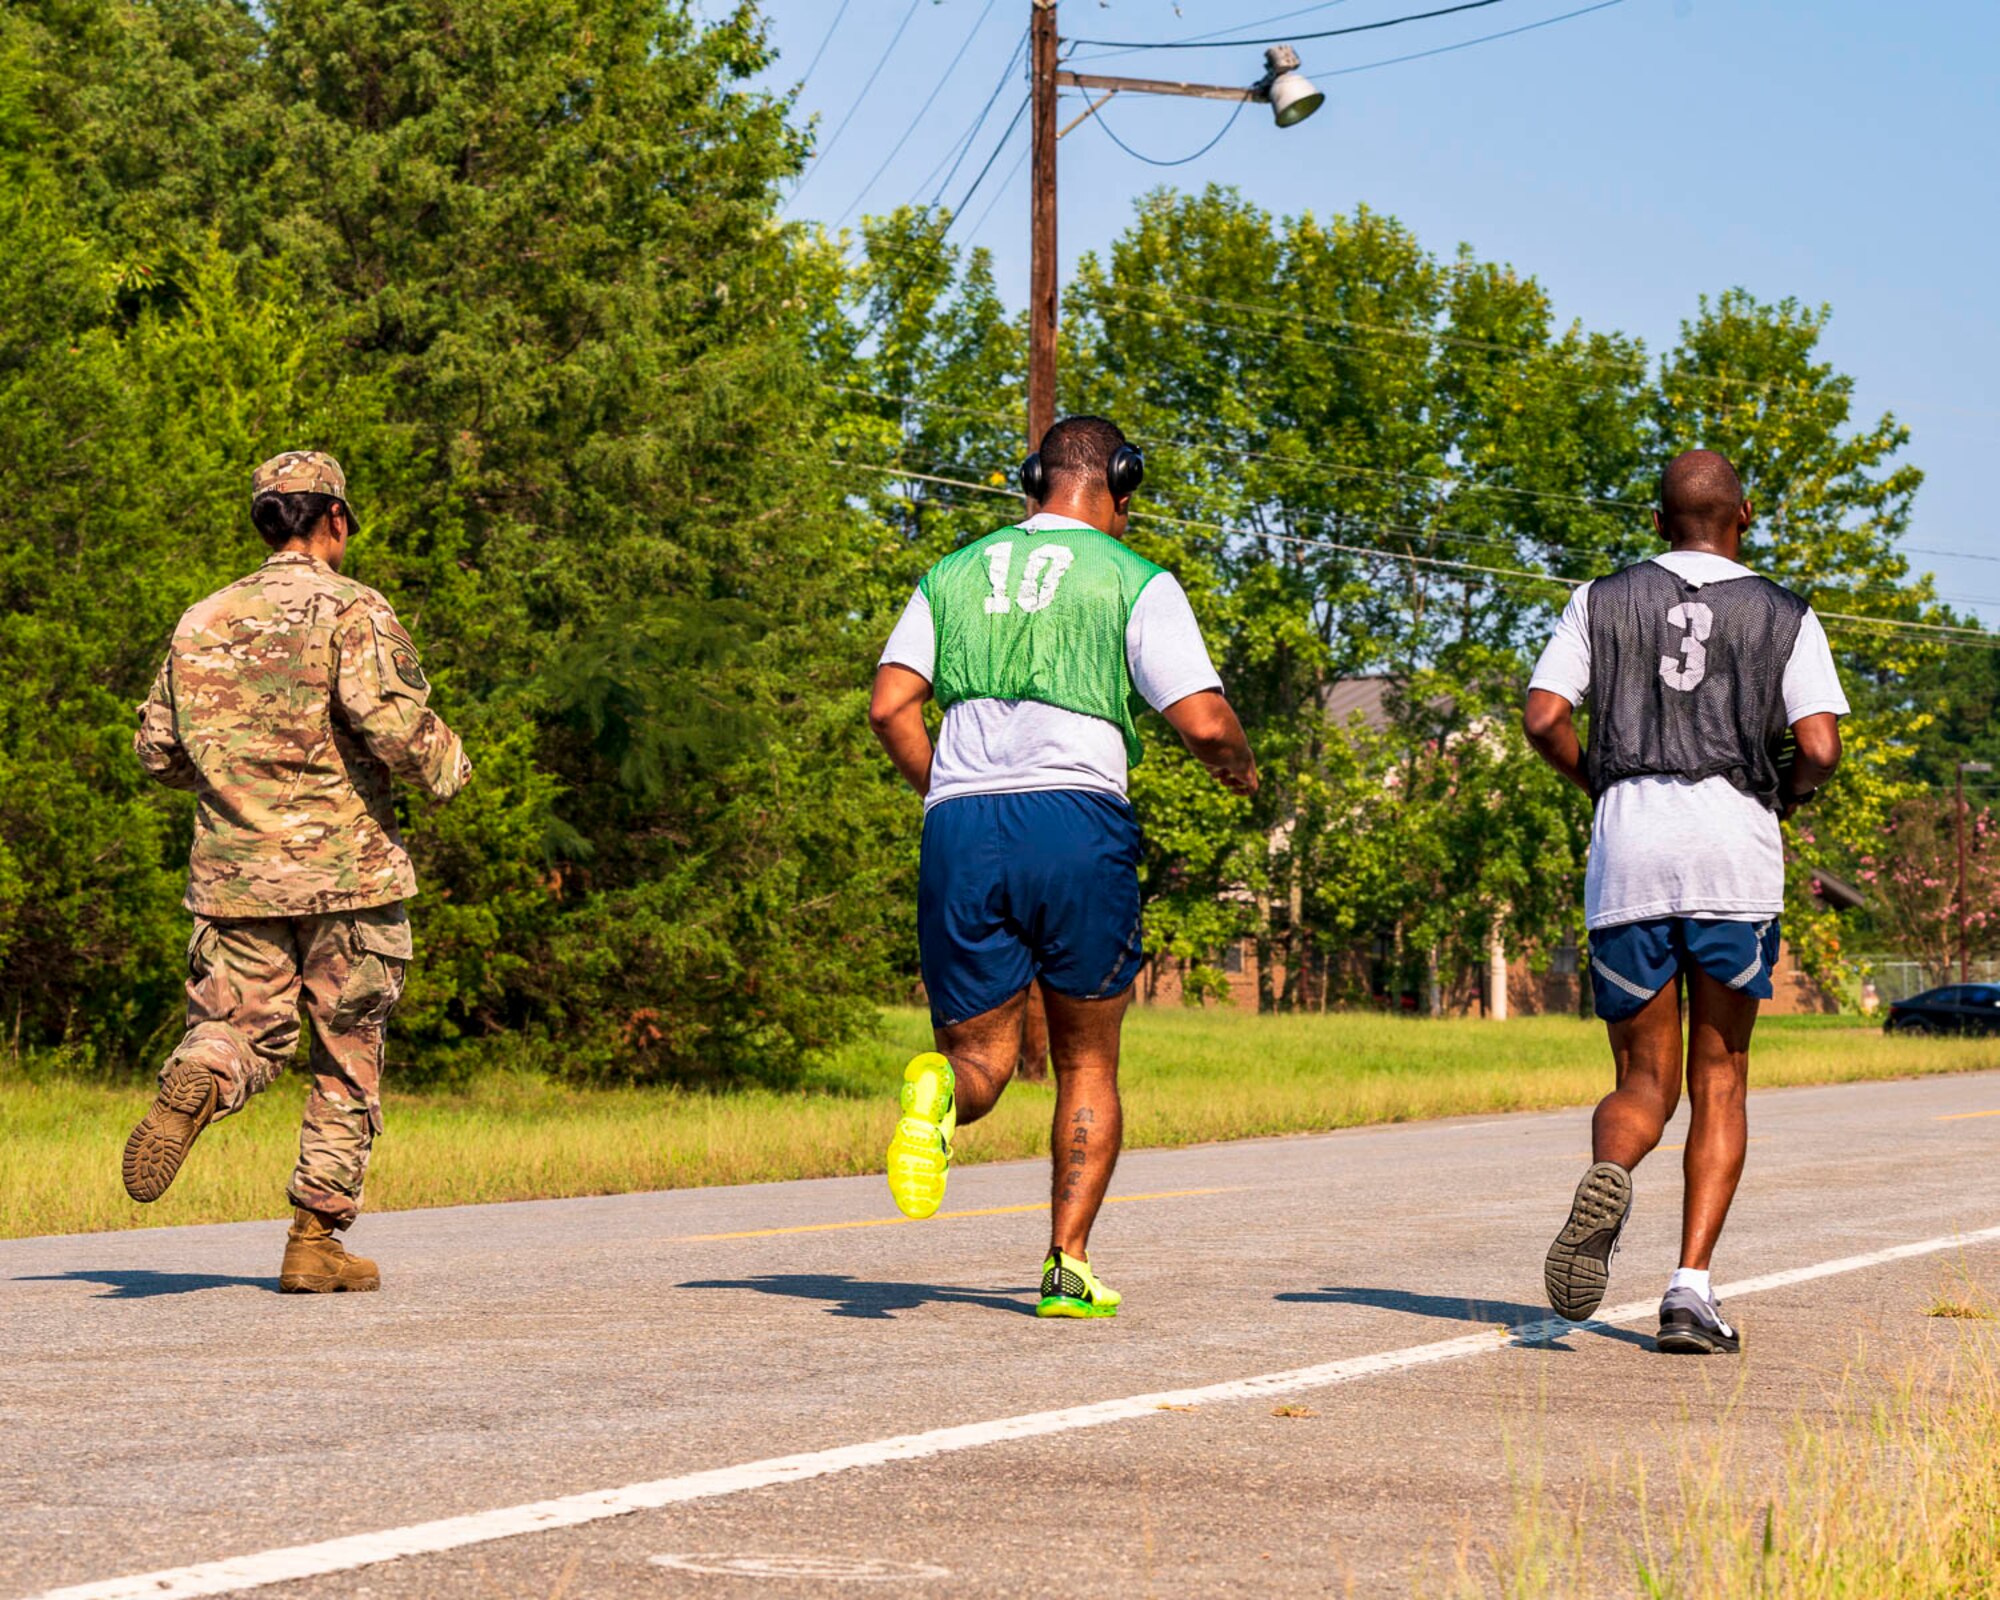 An Airman assigned to the 96th Aerial Port Squadron and a supportive wingmen finishes the run portion of an official physical fitness test Sunday, Sept. 8, 2019, at Little Rock Air Force Base, Ark. Over the drill weekend, the unit fitness program manager and physical training leaders evaluated more than 100 Airmen to ensure annual readiness requirements were upheld. The Air Force Reserve’s overall readiness depends on the individual readiness of each Reserve Citizen Airman. (U.S. Air Force Reserve photo by Maj. Ashley Walker)